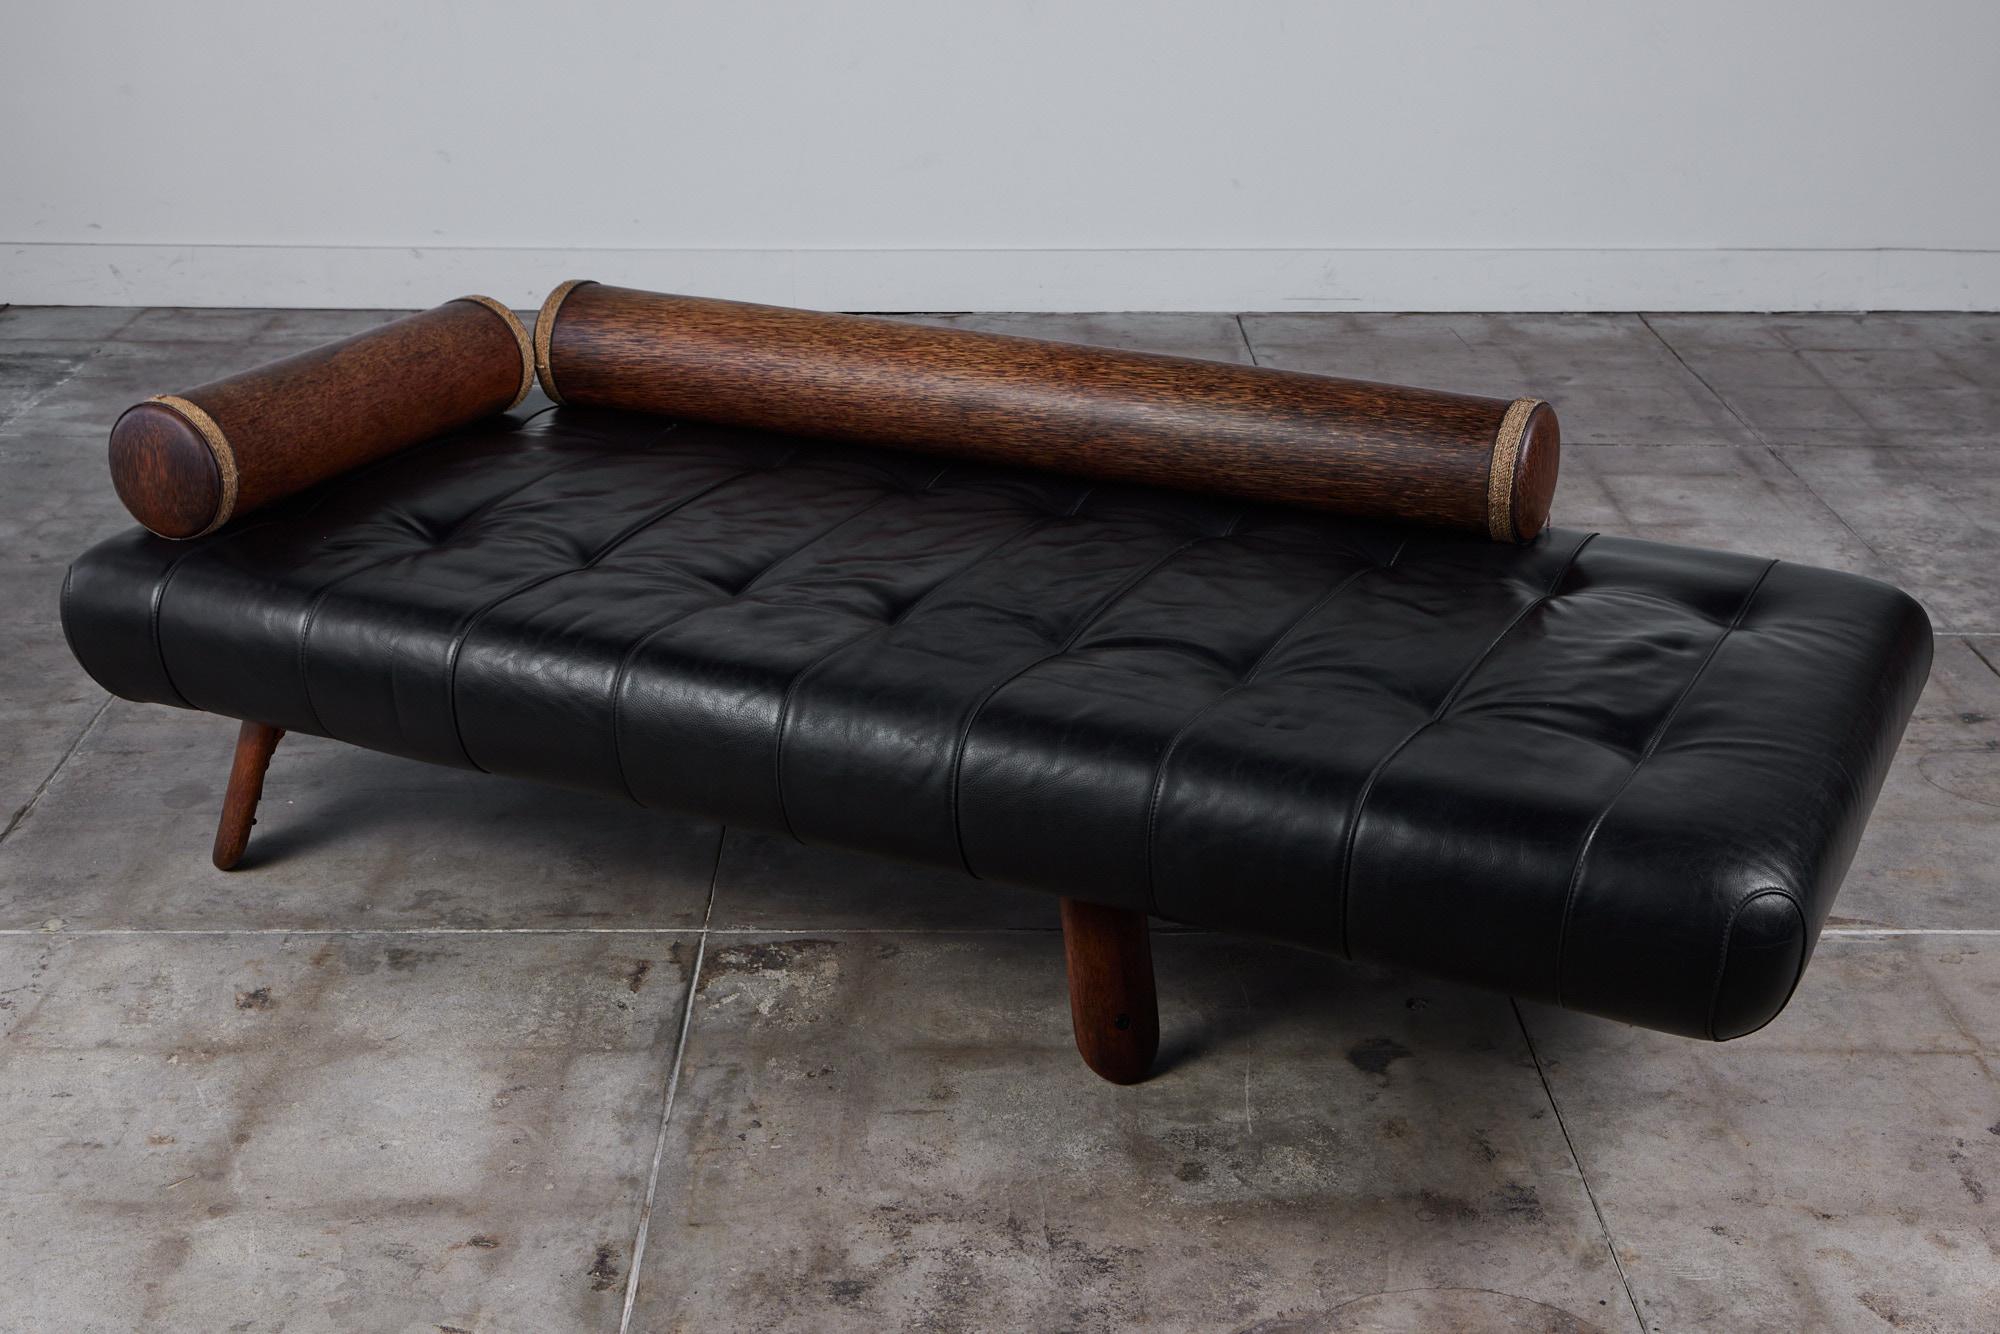 Chaise Lounge by Australian company Pacific Green Furniture. The handcrafted chaise features a rich black leather tufted seat on four splayed Palmwood legs. Two Palmwood bolsters finished in a rope detail rest on the seat of the chaise.

Pacific